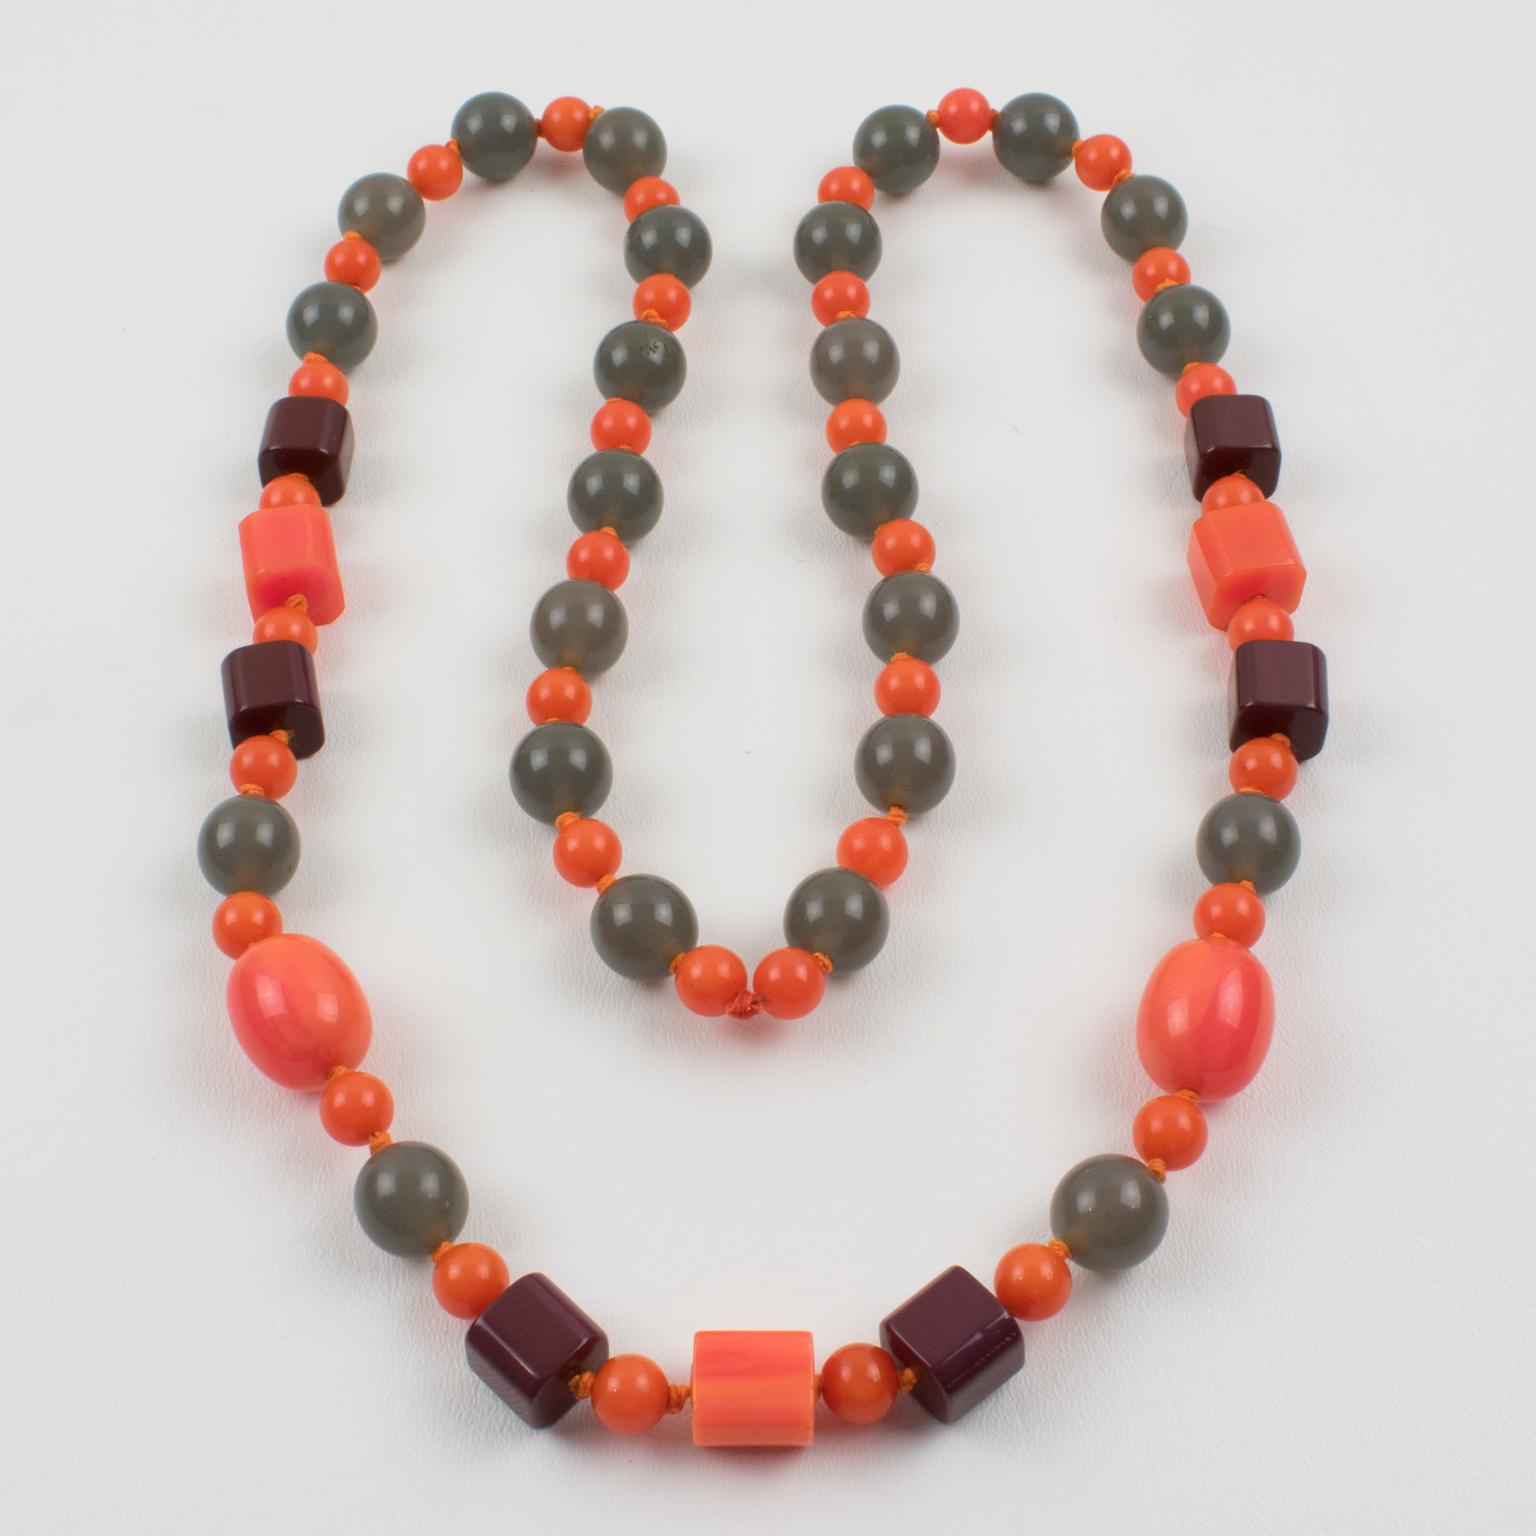 Exquisite extra-long Bakelite and Lucite beaded necklace. Assorted beads in various shapes: round, little square, and oval. Elegant mix and match colors, tequila pink marble, purple plum, and tangerine orange contrasted with mouse gray Lucite beads.